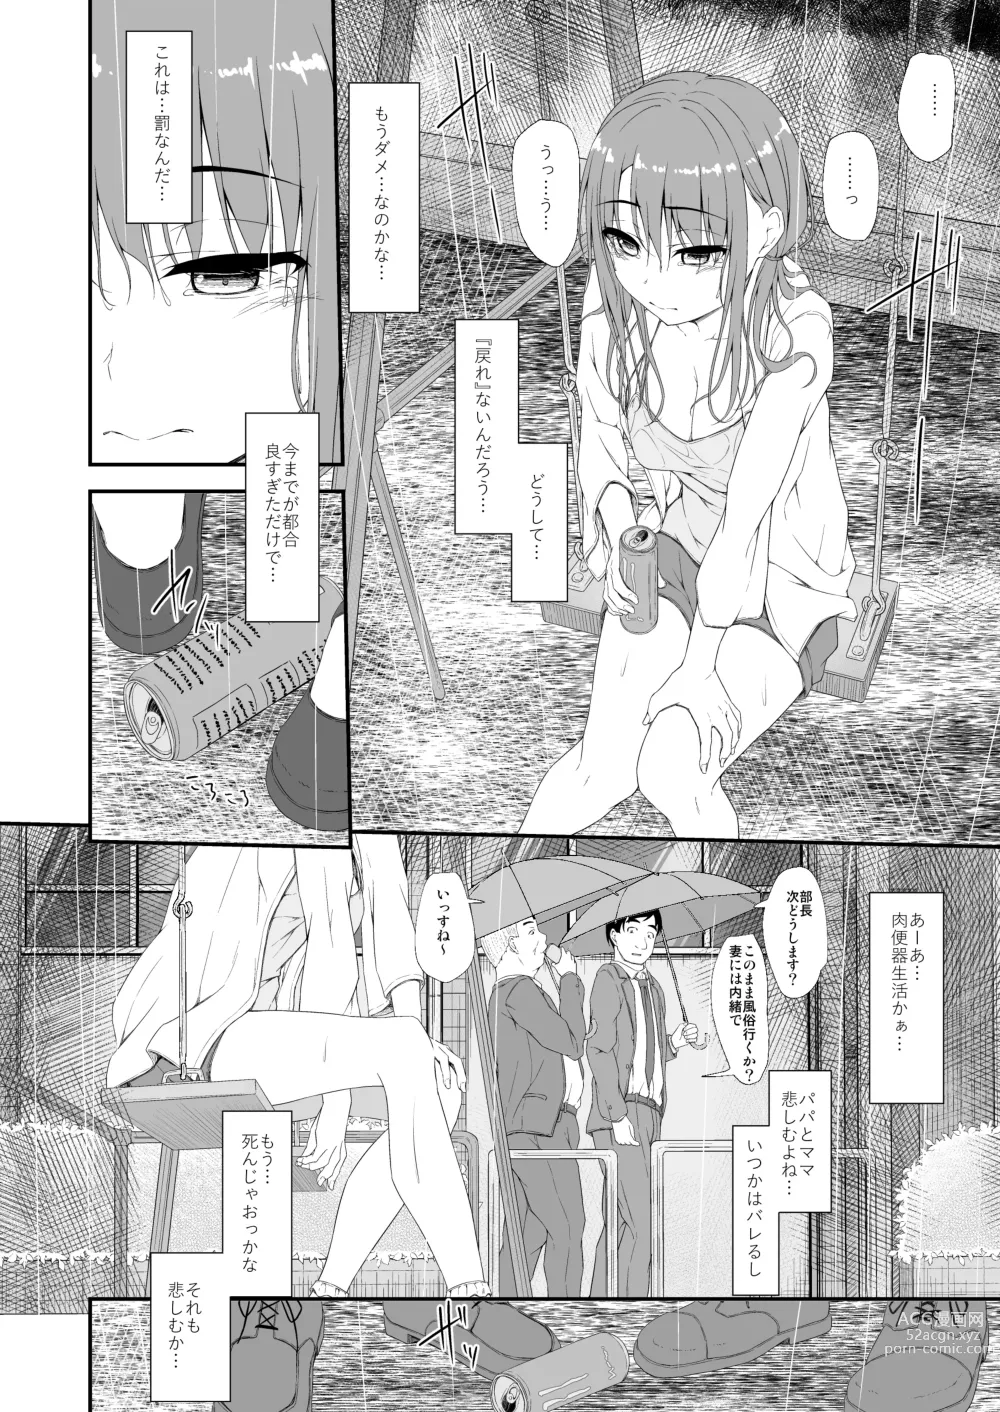 Page 5 of doujinshi Re:Temptation 6